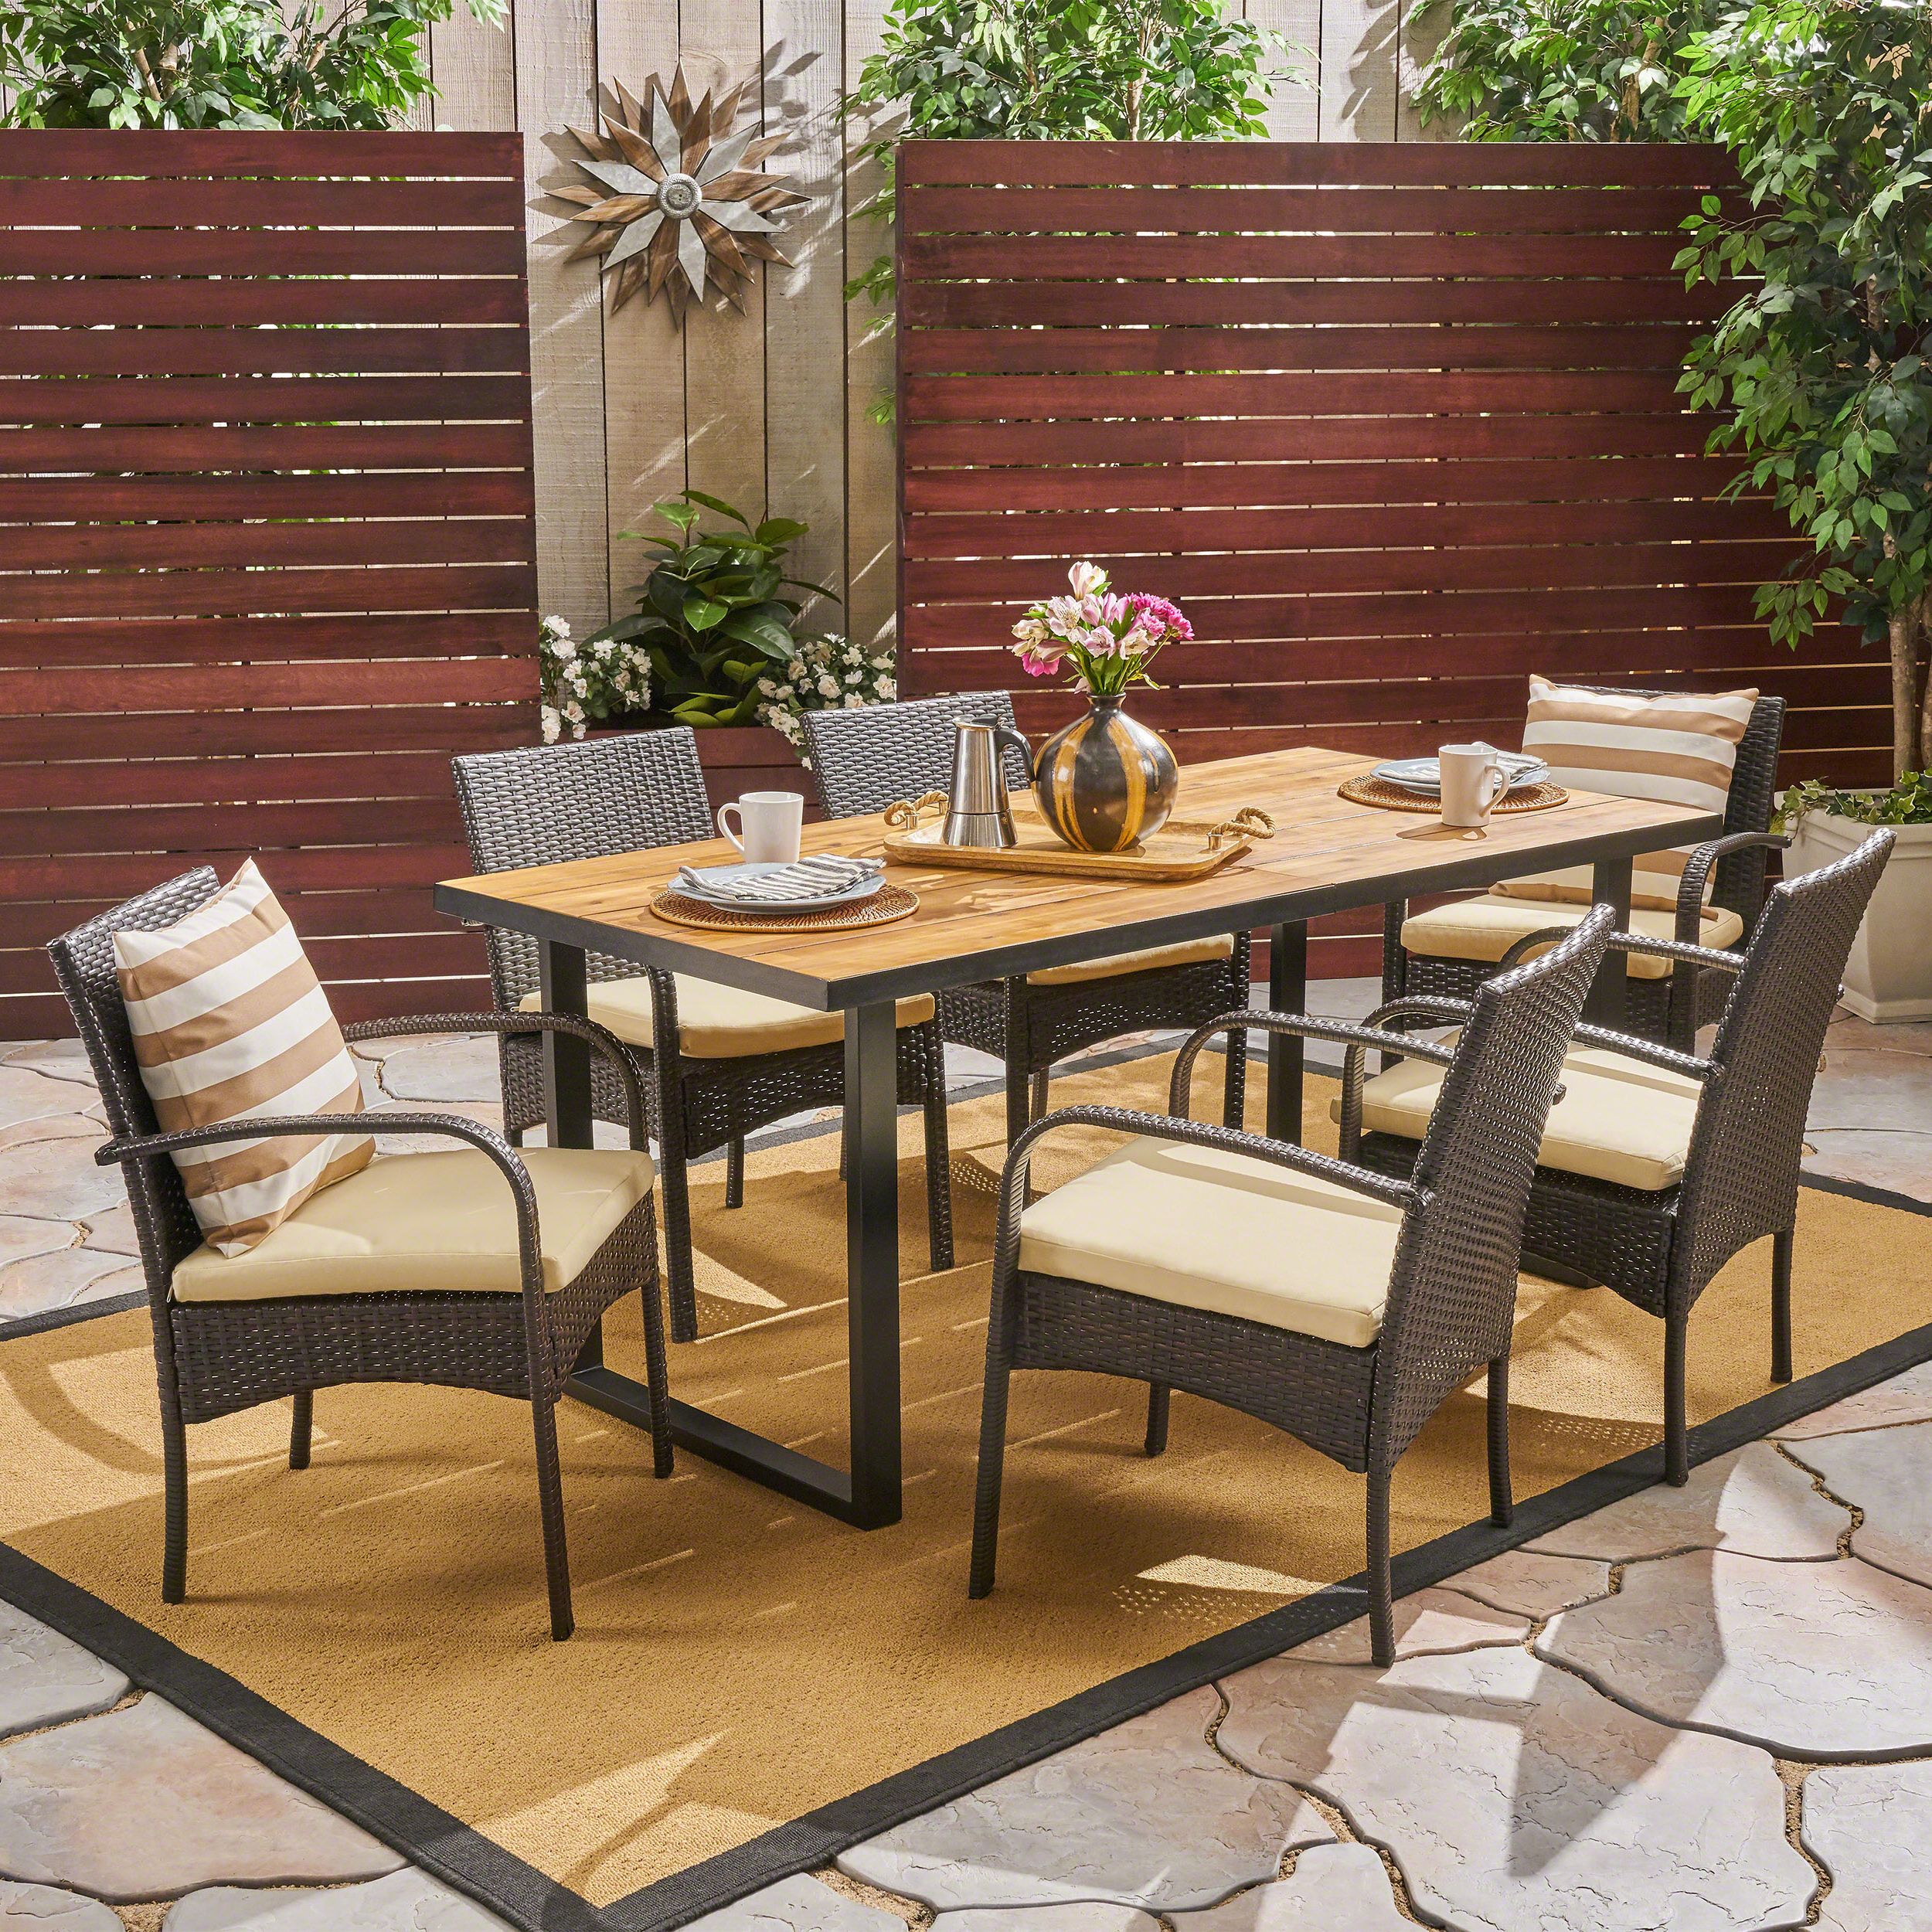 Juliet Outdoor 7 Piece Acacia Wood And Wicker Rectangular Dining Set For Most Recent Teak Wood Rectangular Patio Dining Sets (View 6 of 15)